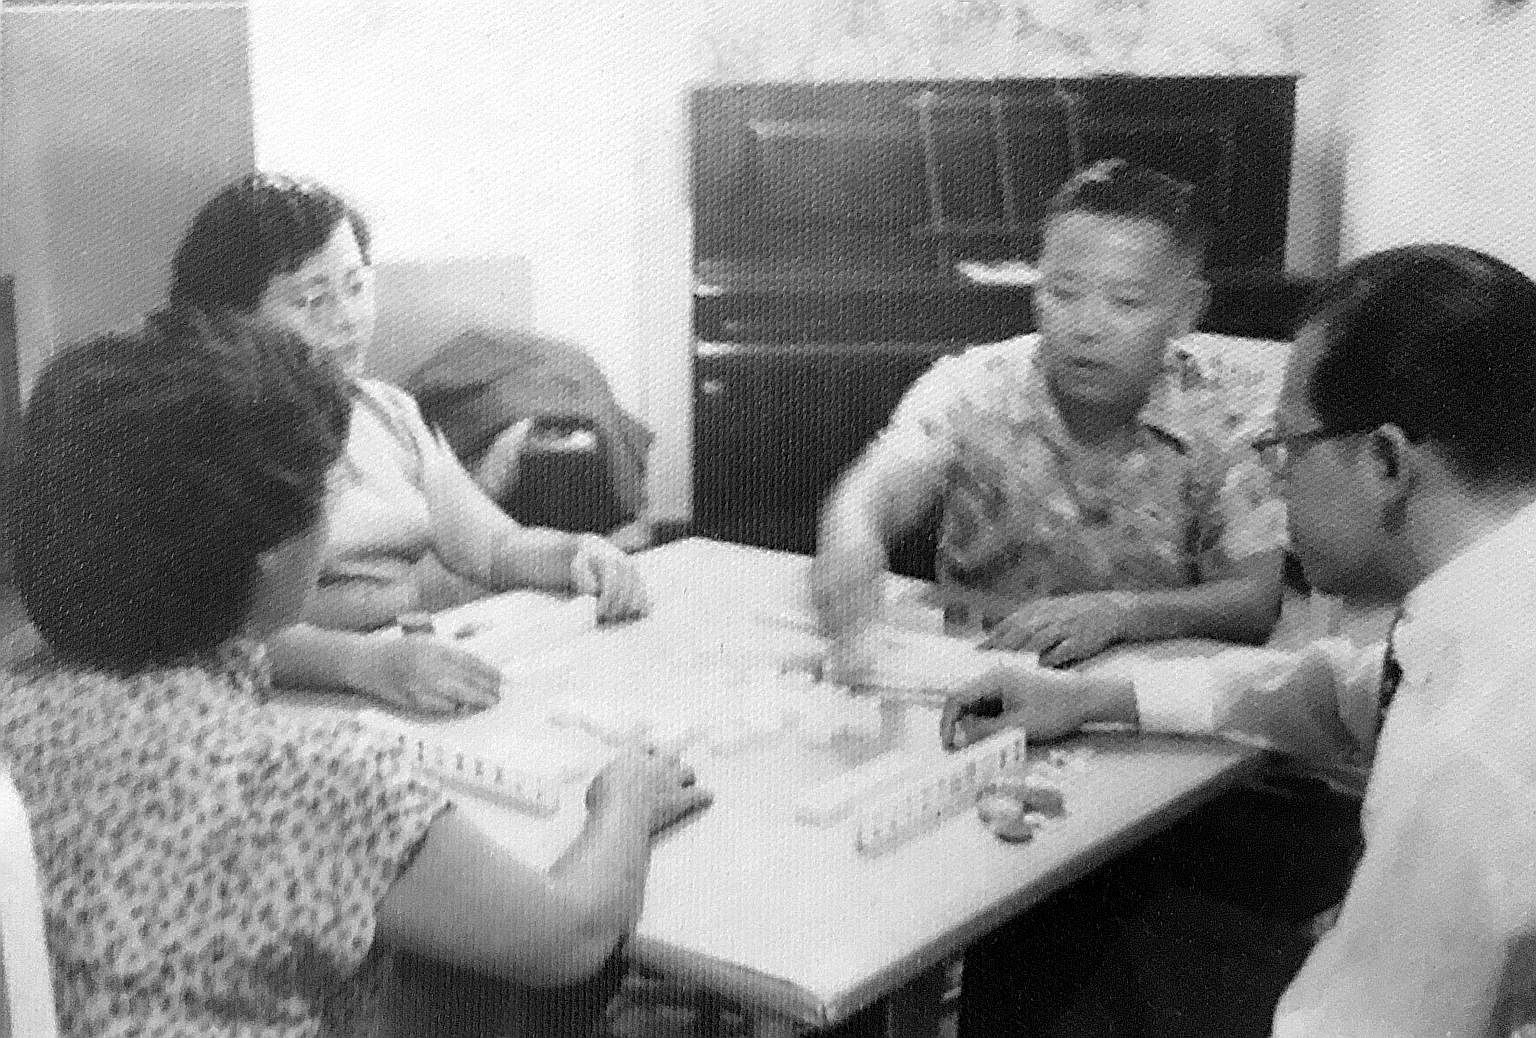 The writer's grandfather (facing camera) and grandmother (back to camera) playing mahjong with their friends. These sessions would last till 2am.